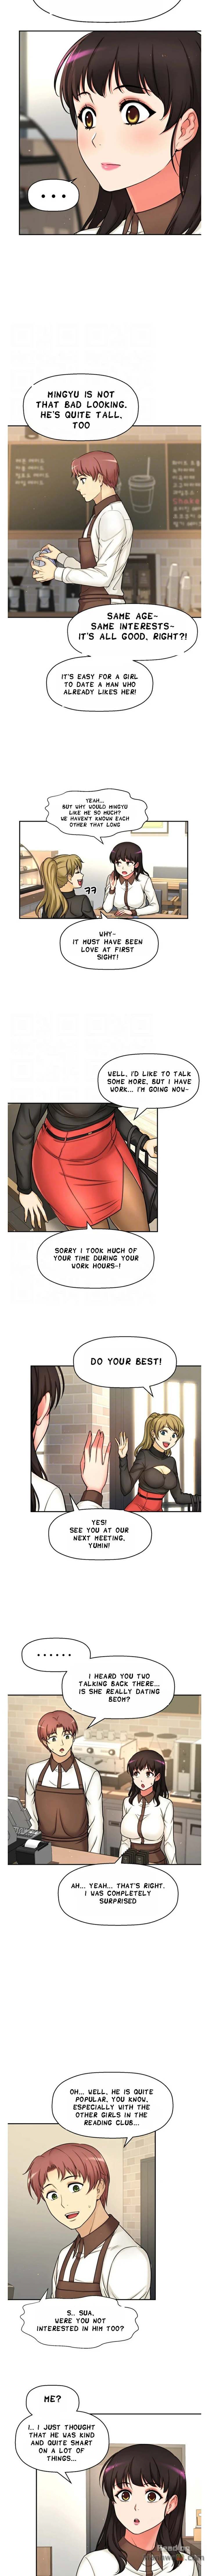 She Is Young 2 - Chapter 12 Page 4